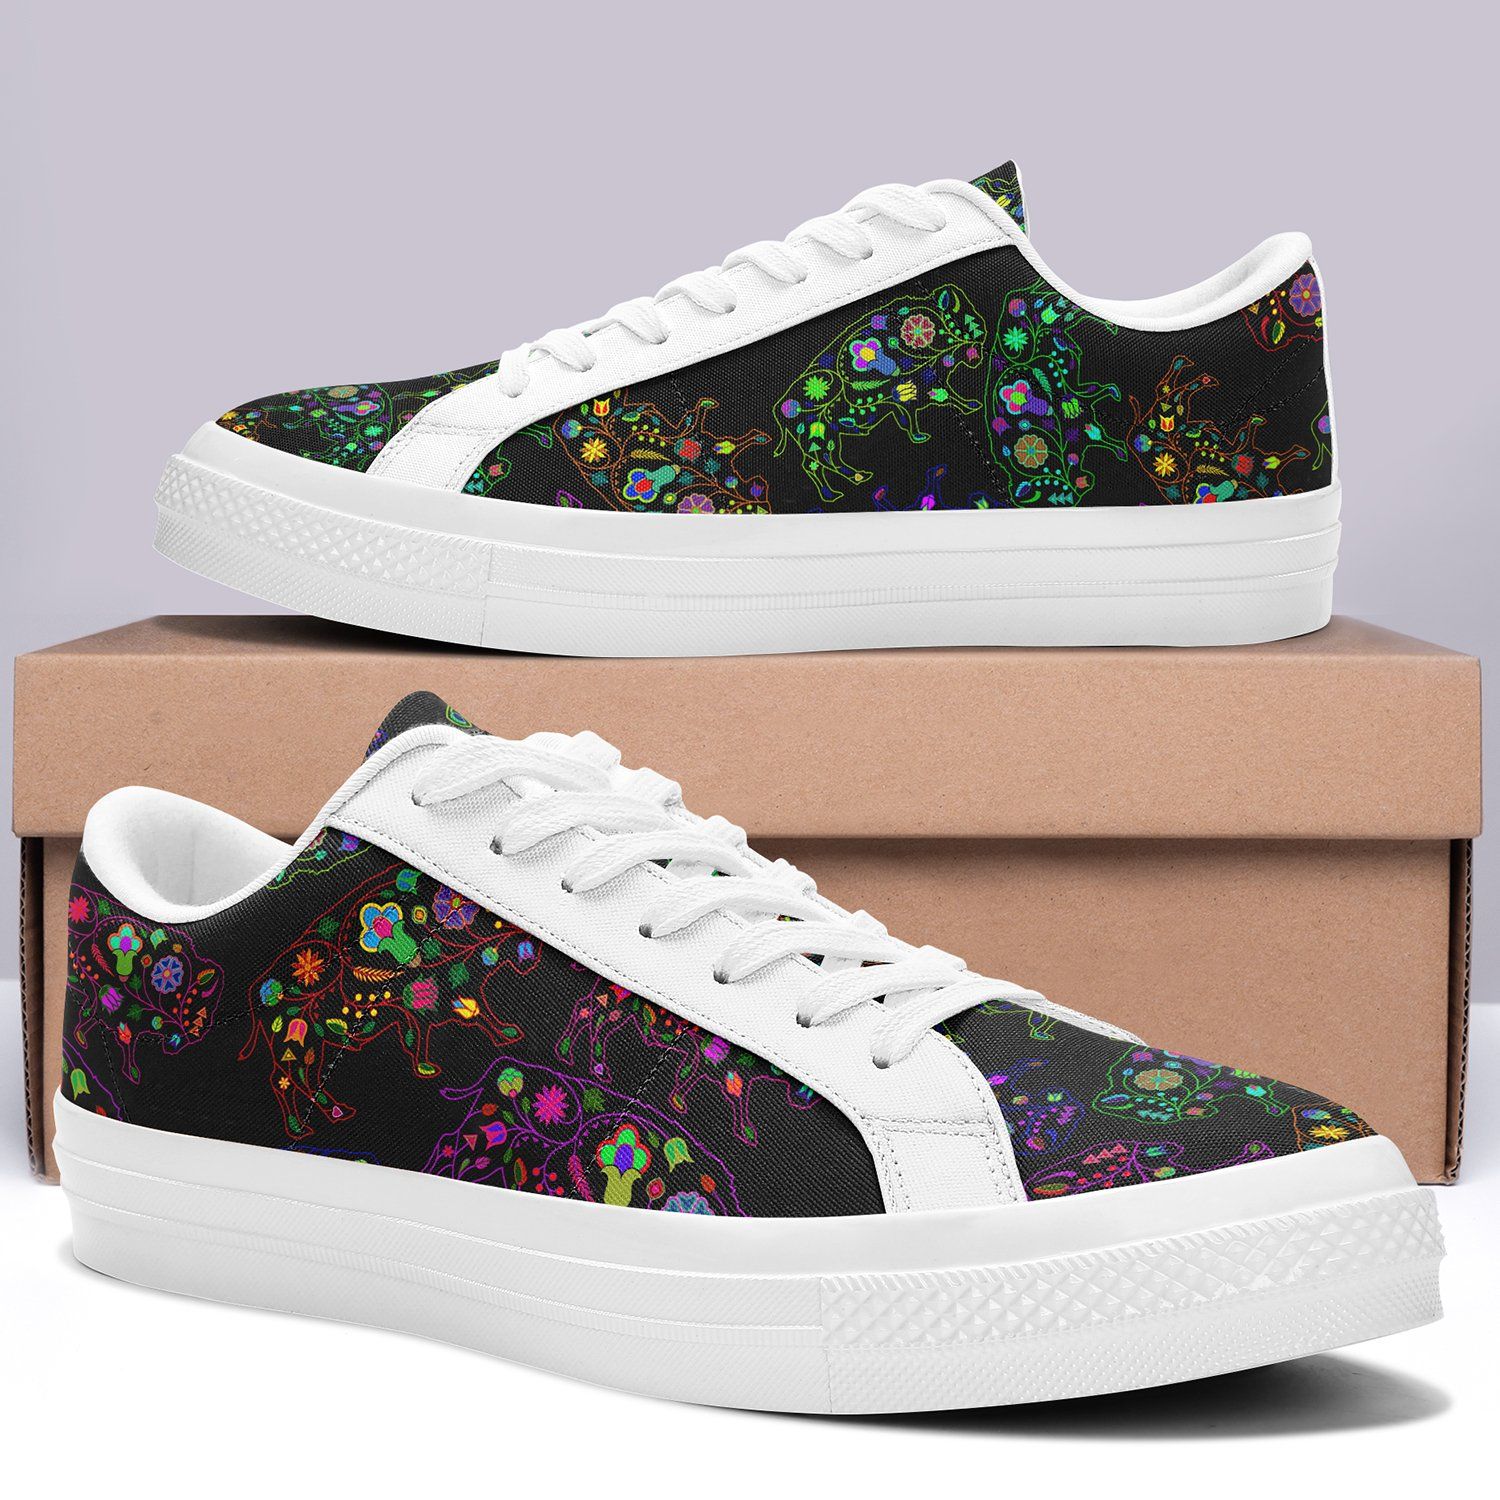 Floral Buffalo Aapisi Low Top Canvas Shoes White Sole aapisi Herman 